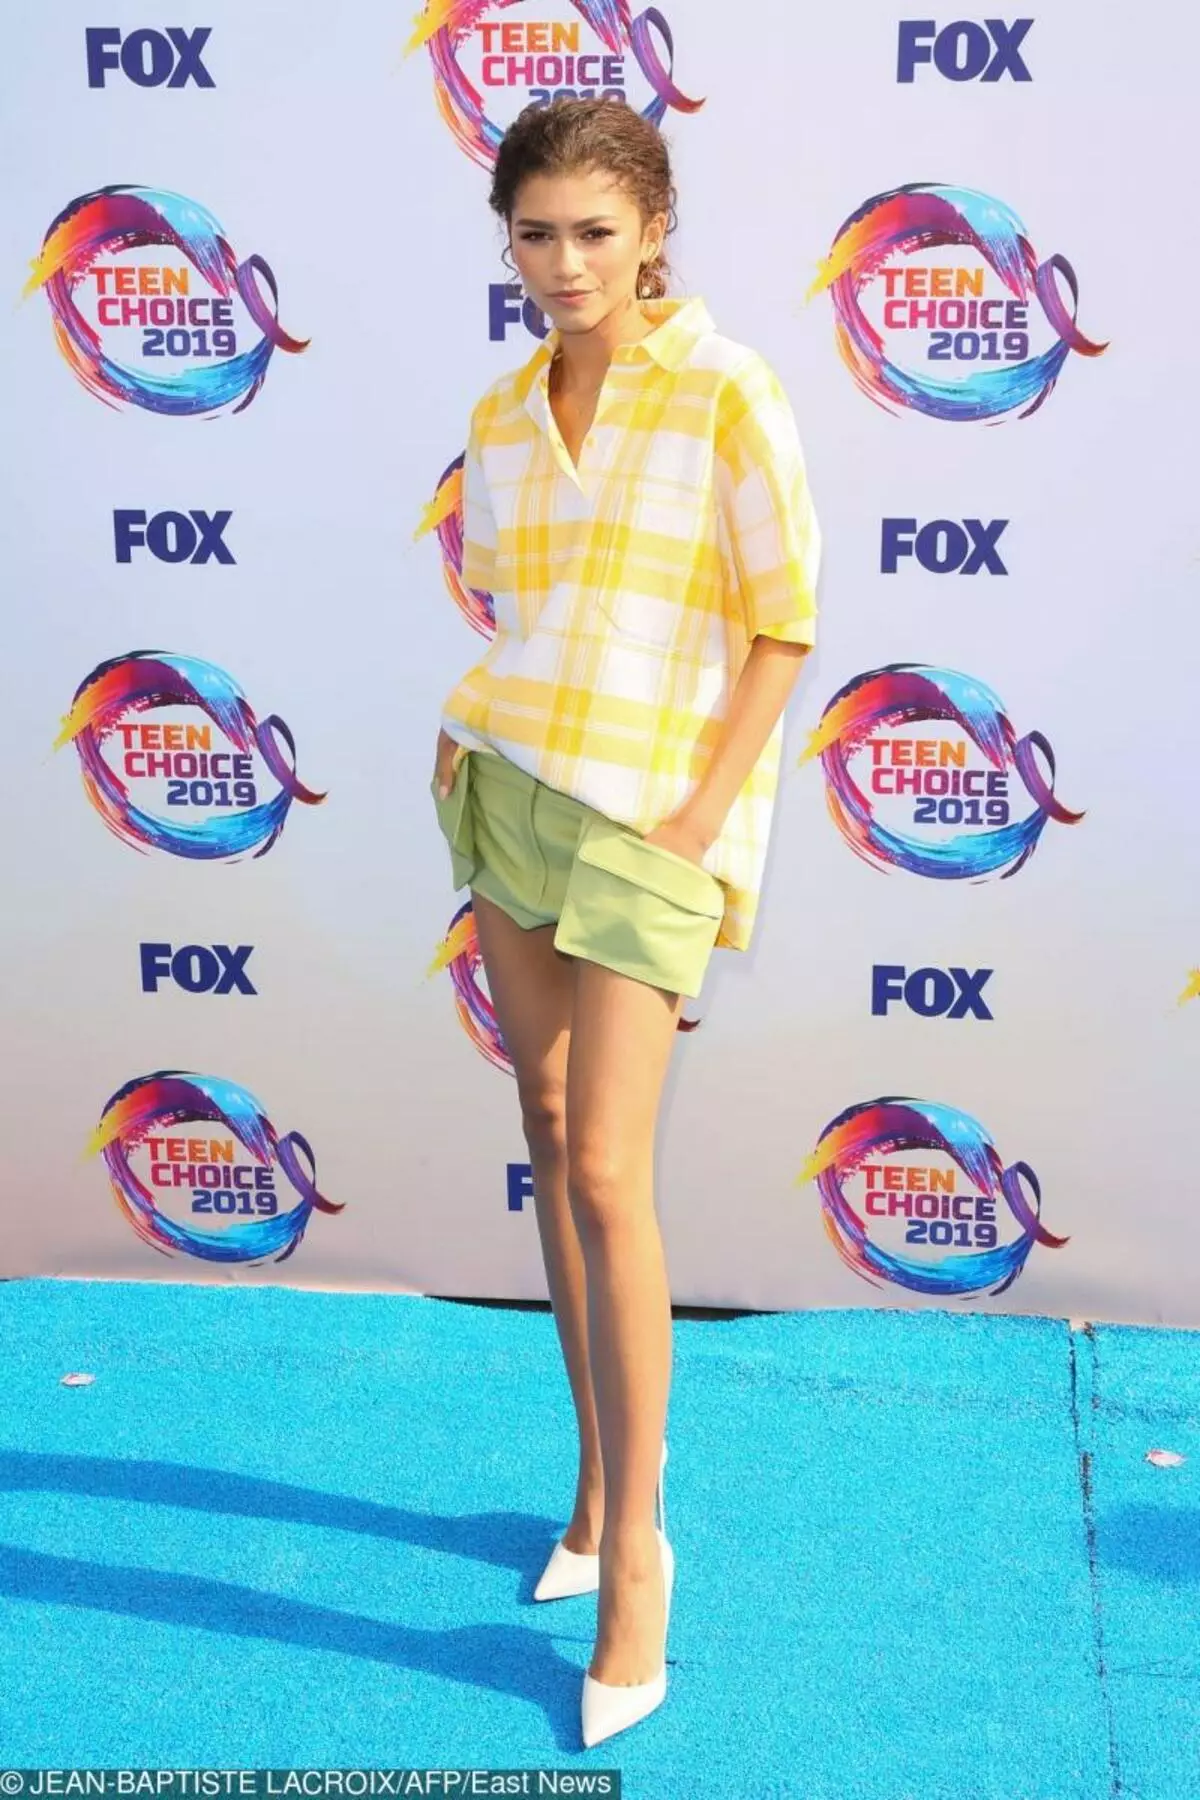 Robert Downey Jr. Jessica Alba, Lucy Hale and others on Teen Choice Awards 2019 30845_6